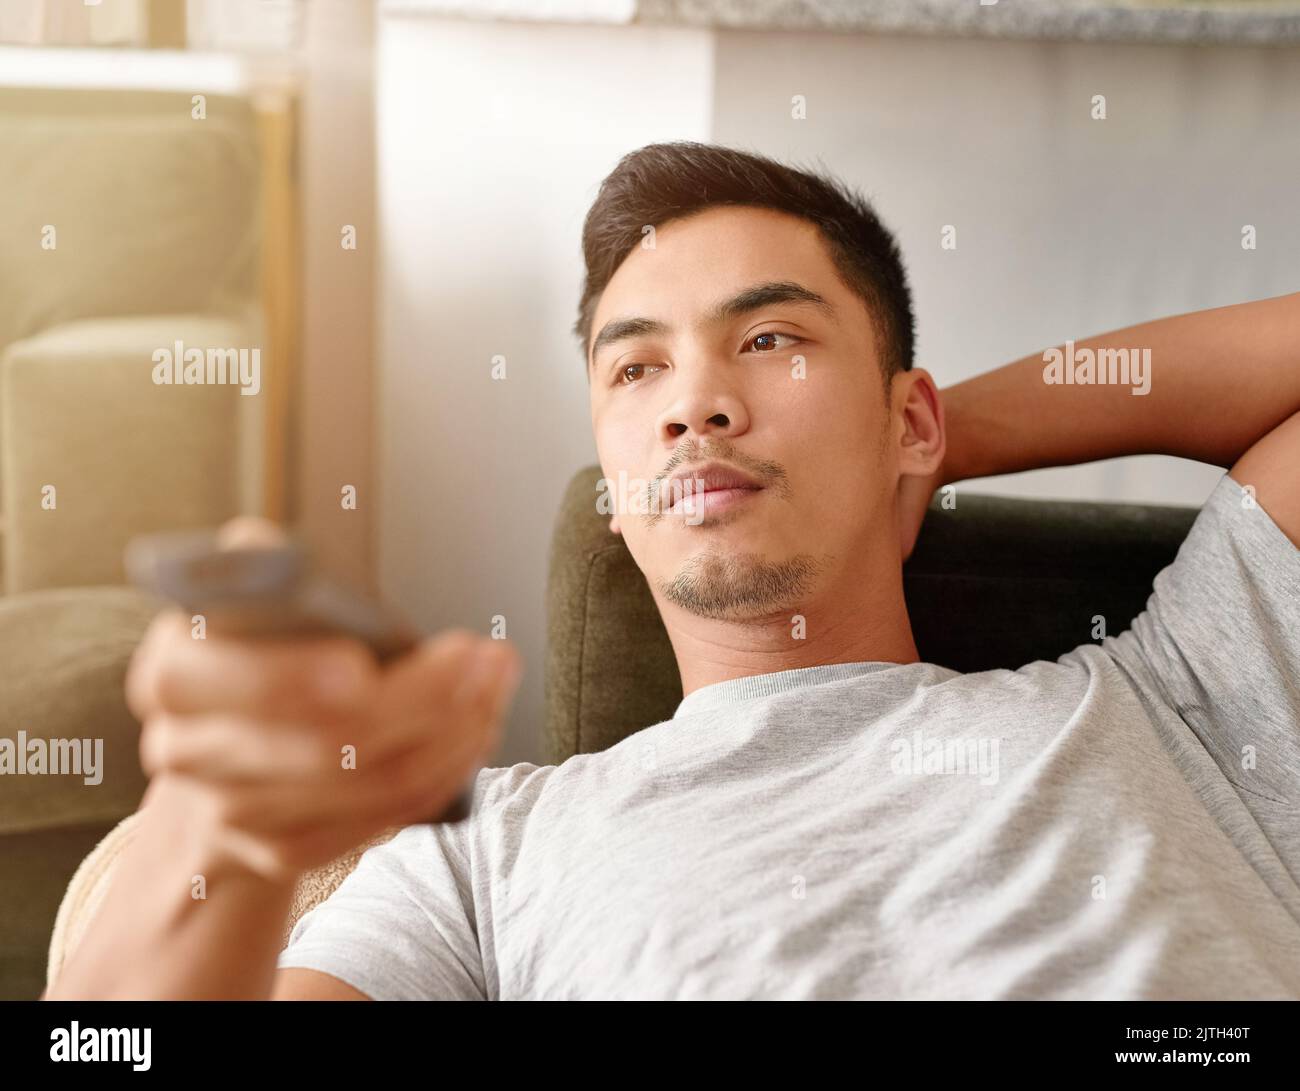 Saturdays are his couch potato days. a young man using a remote control to change the channel on his television while he lies on the couch. Stock Photo